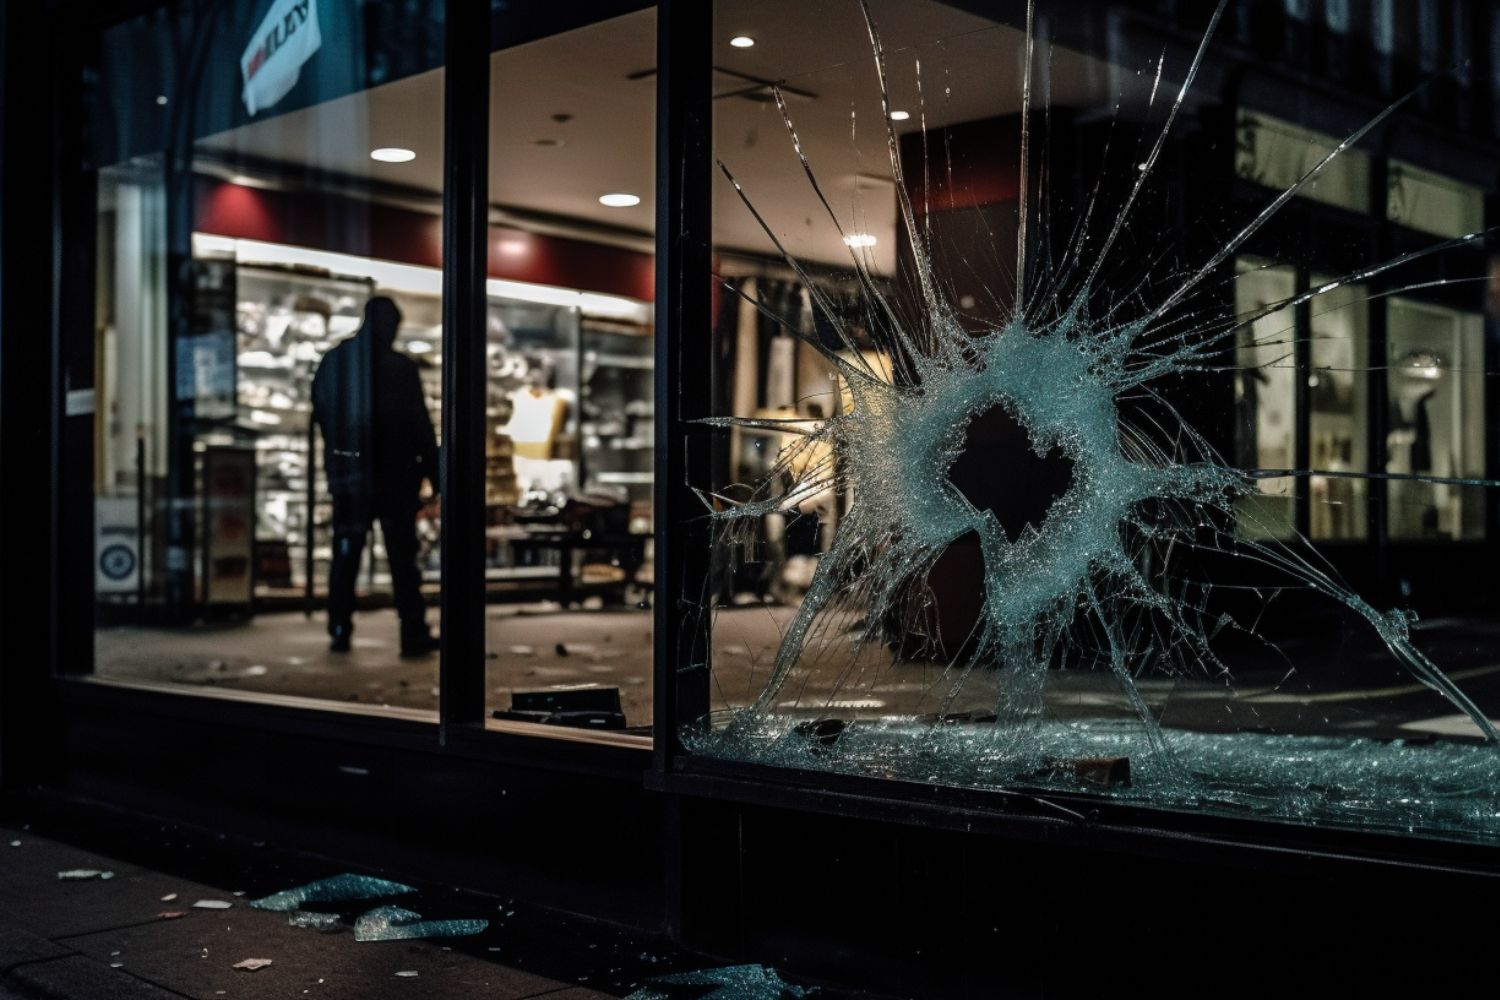 retail crime - violence and theft